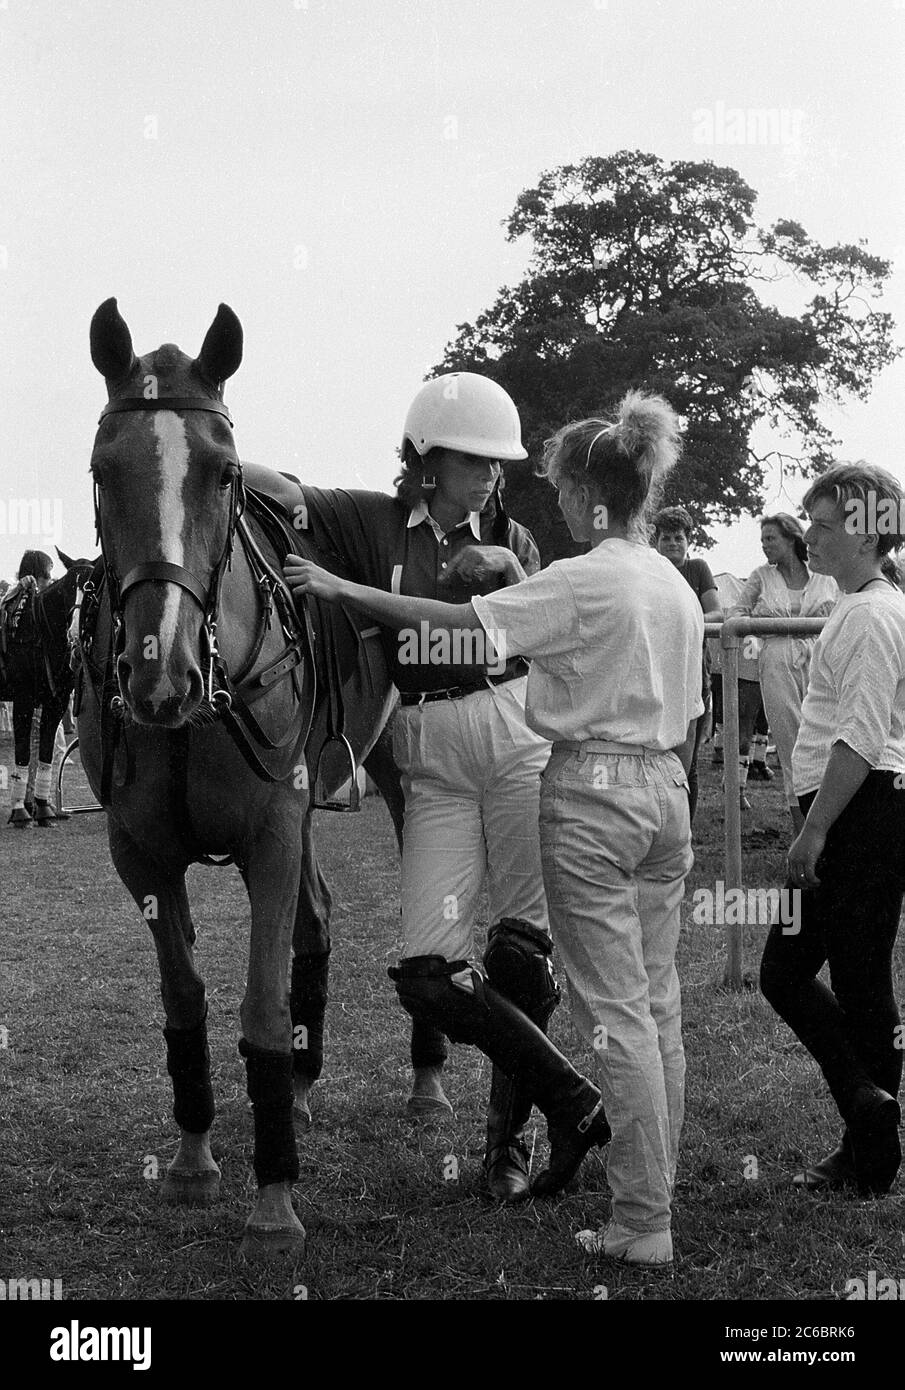 American actress Stefanie Powers at the Royal Berkshire Polo Club England Stock Photo